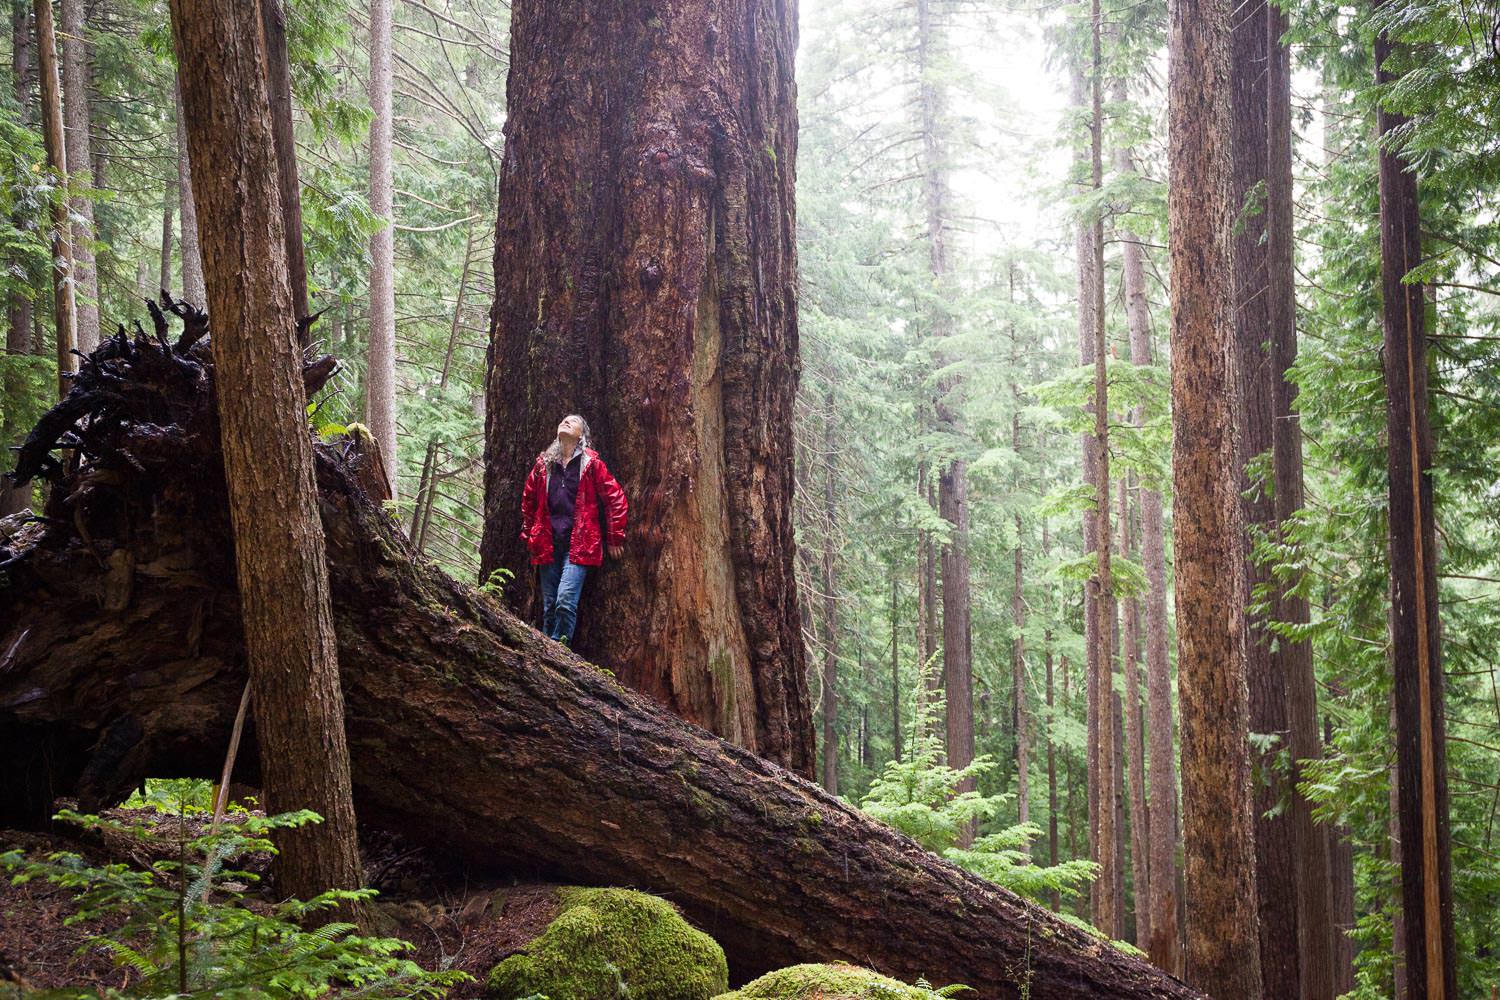 ACTION ALERT: Speak up for ancient forests. Submit your feedback on Budget 2021 by June 26th!